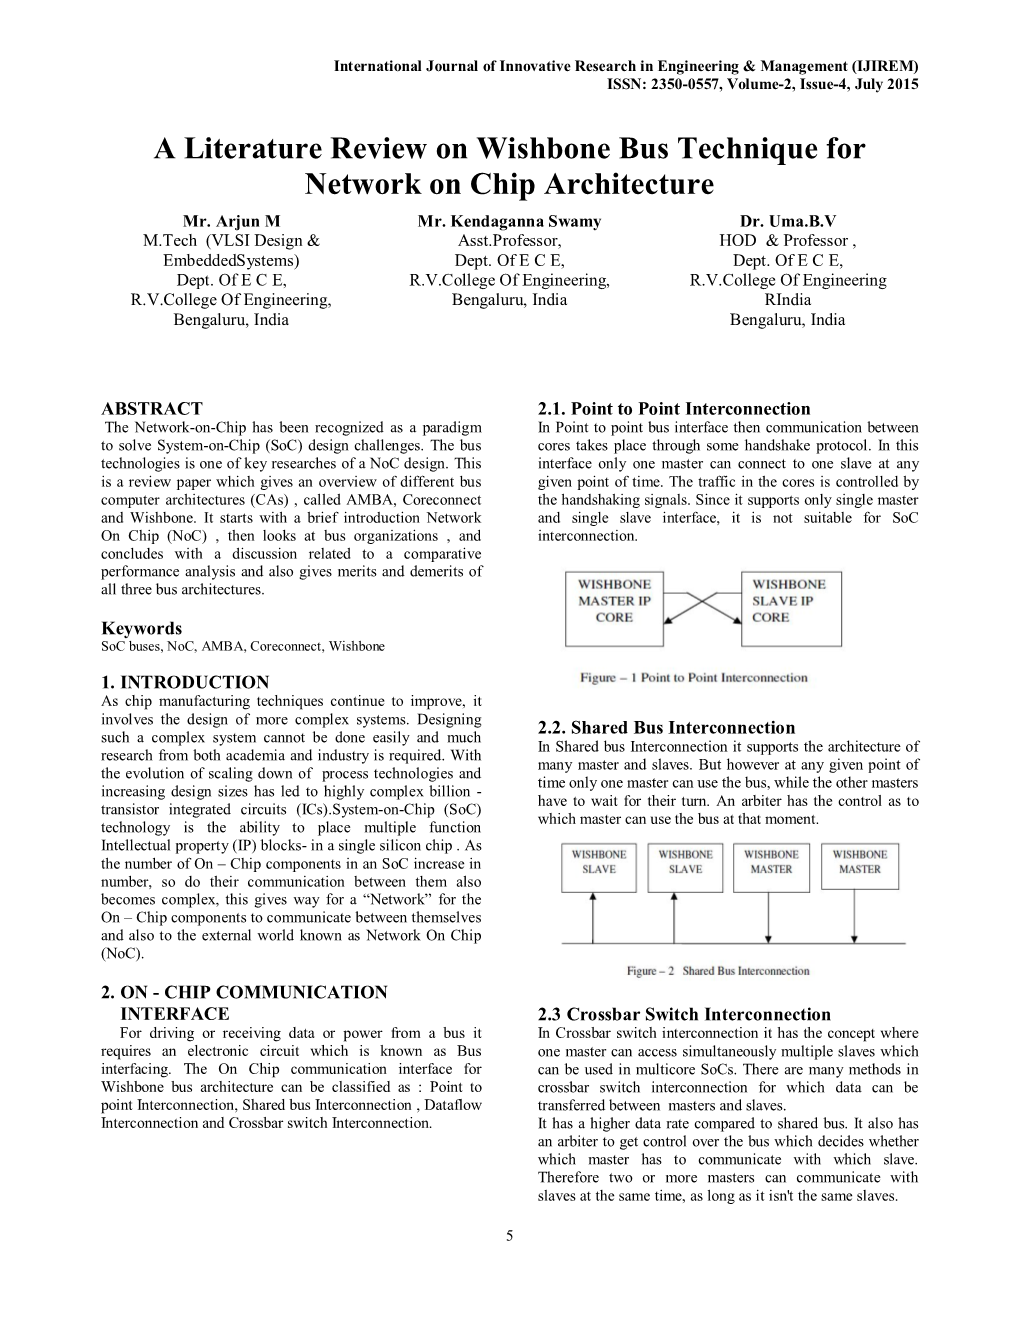 A Literature Review on Wishbone Bus Technique for Network on Chip Architecture Mr